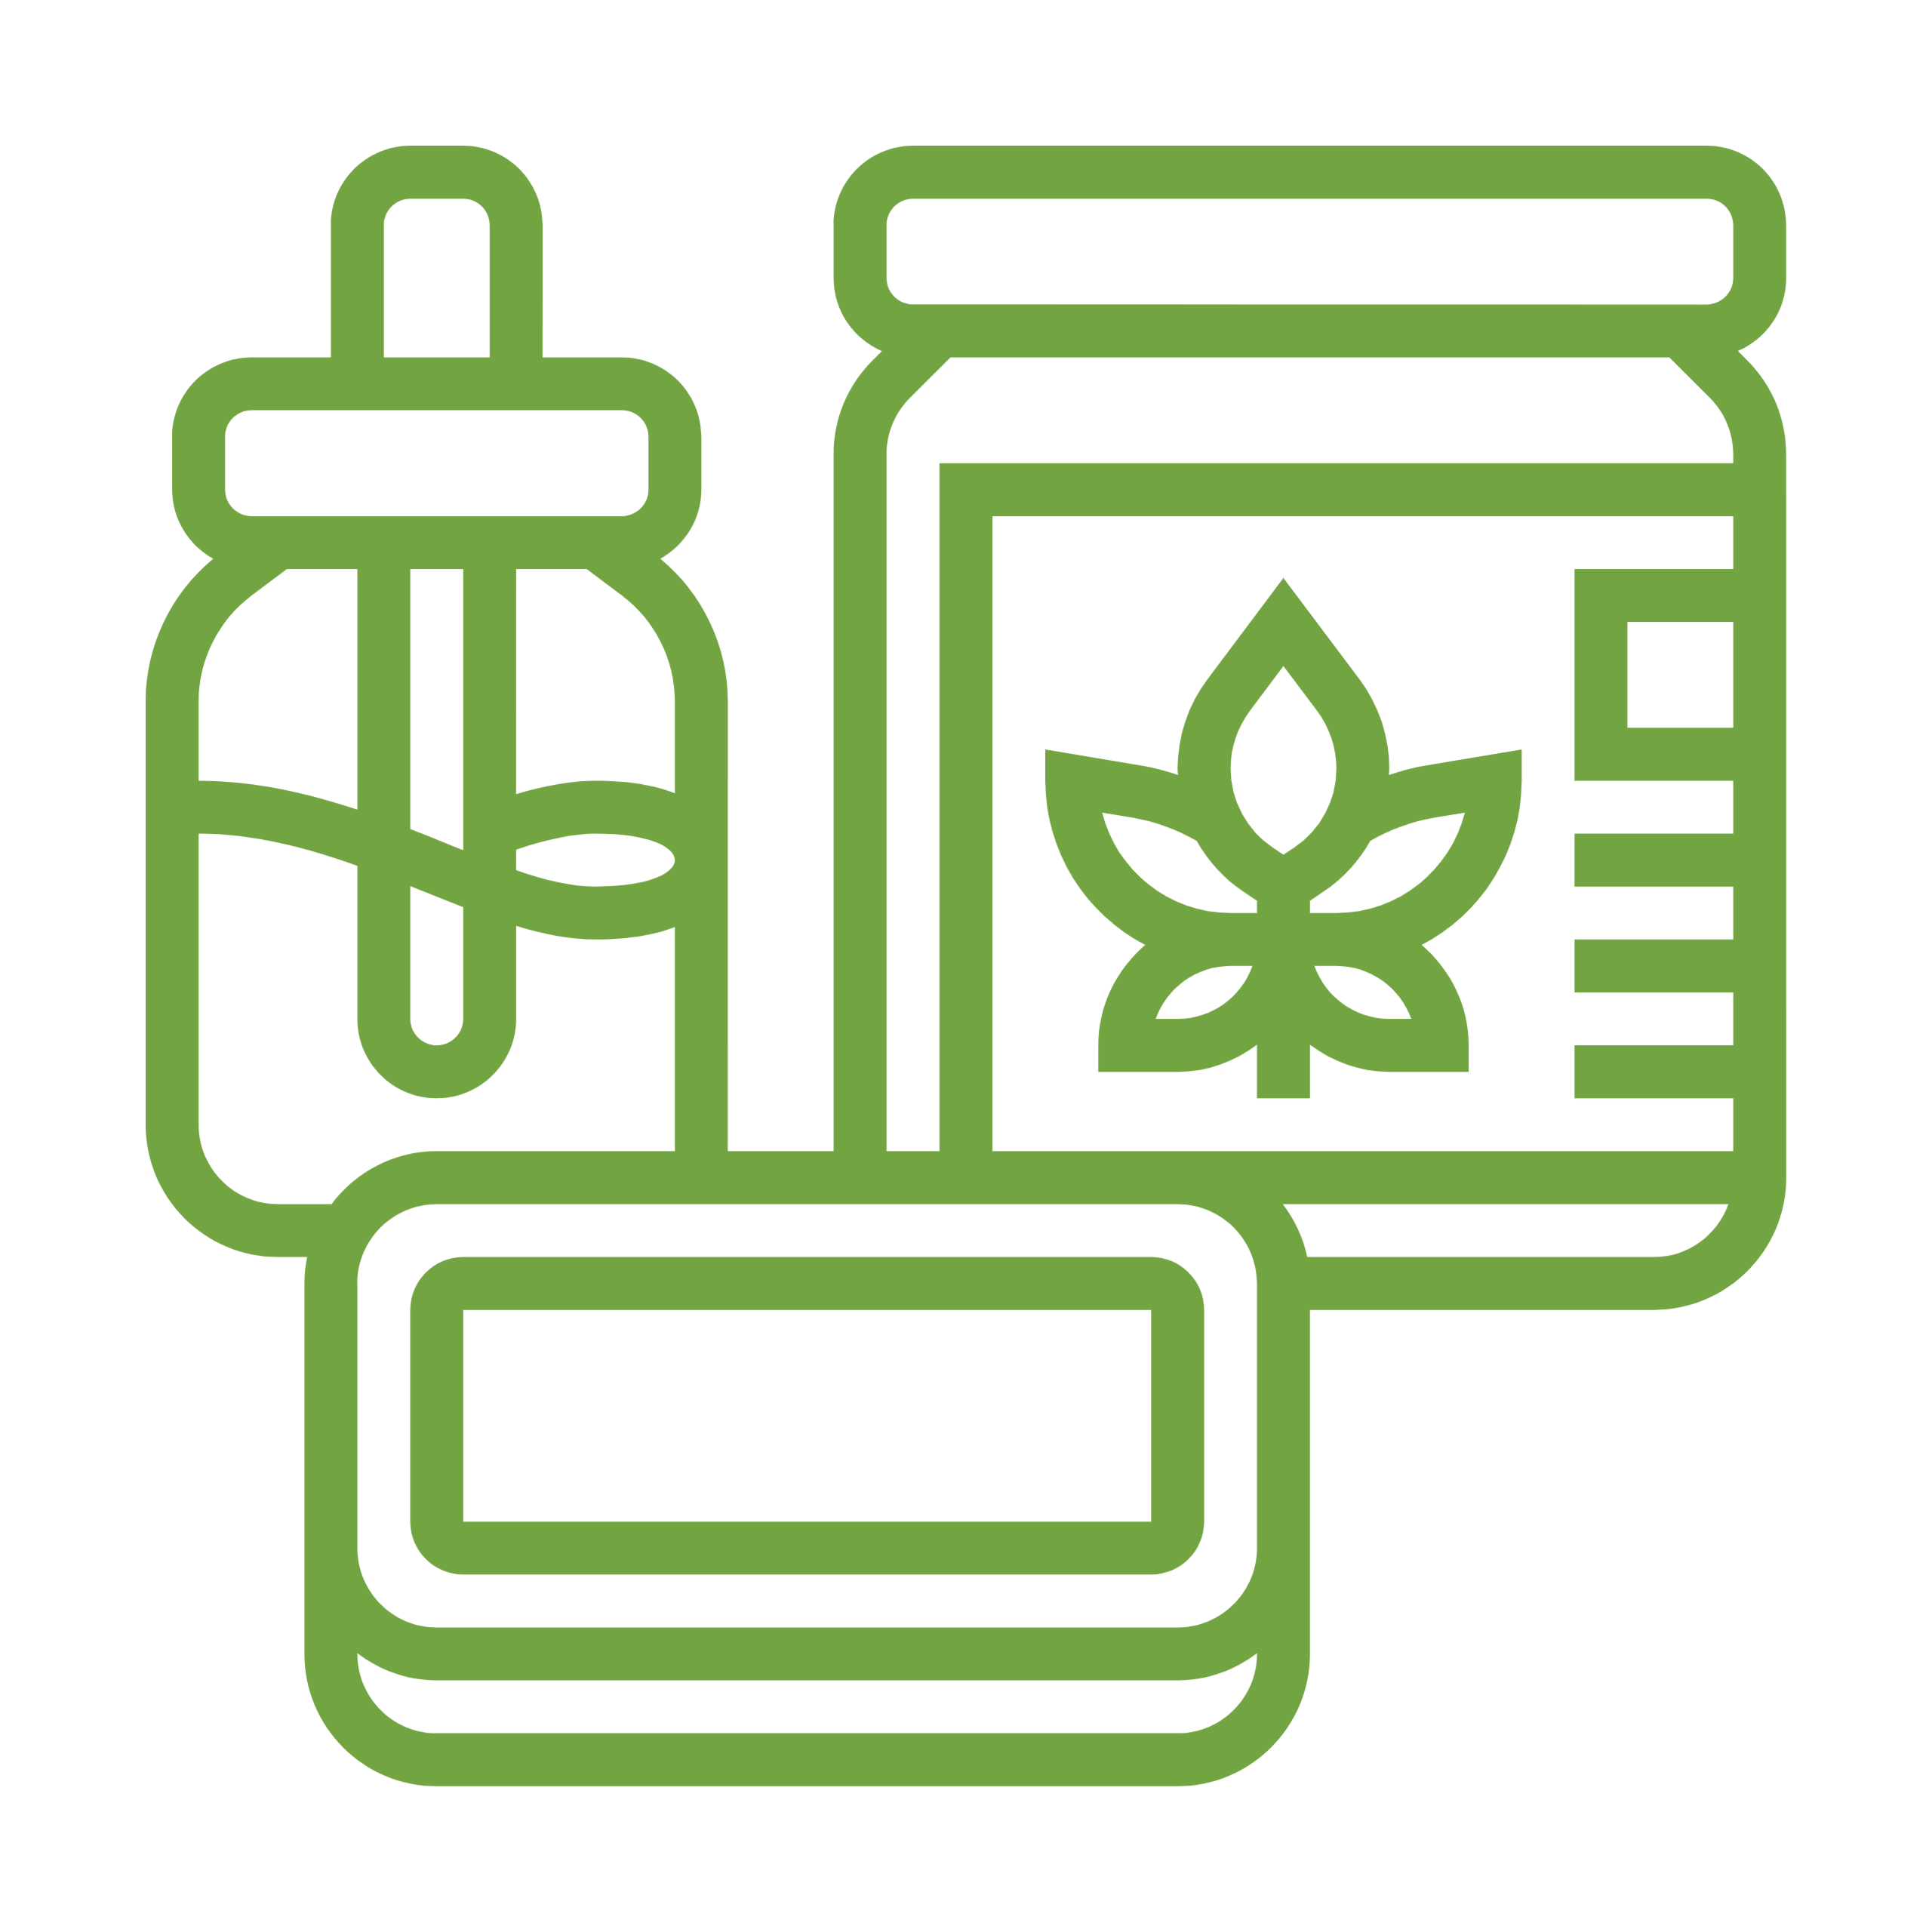 cannabis products